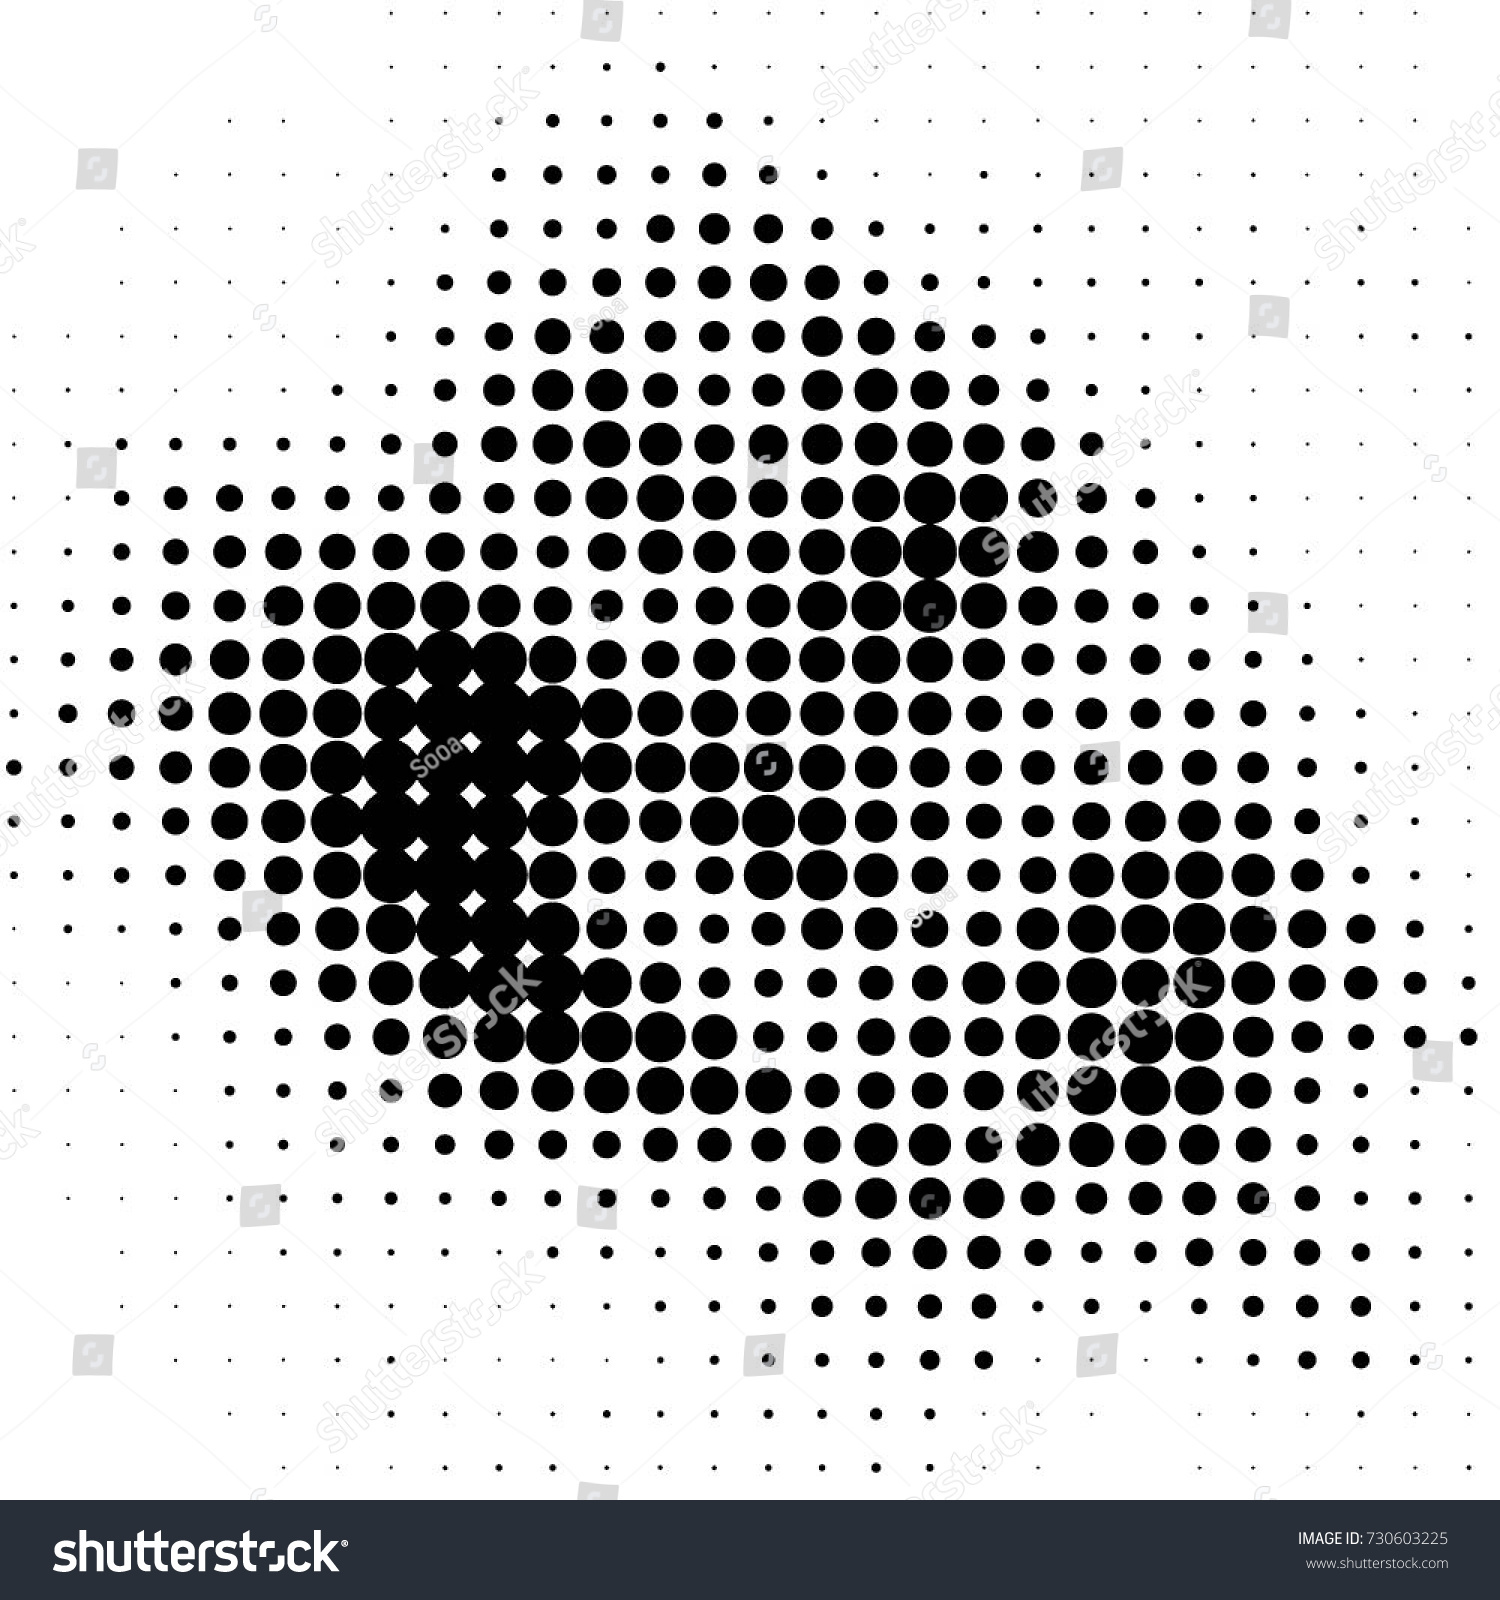 Dotted background pattern photo